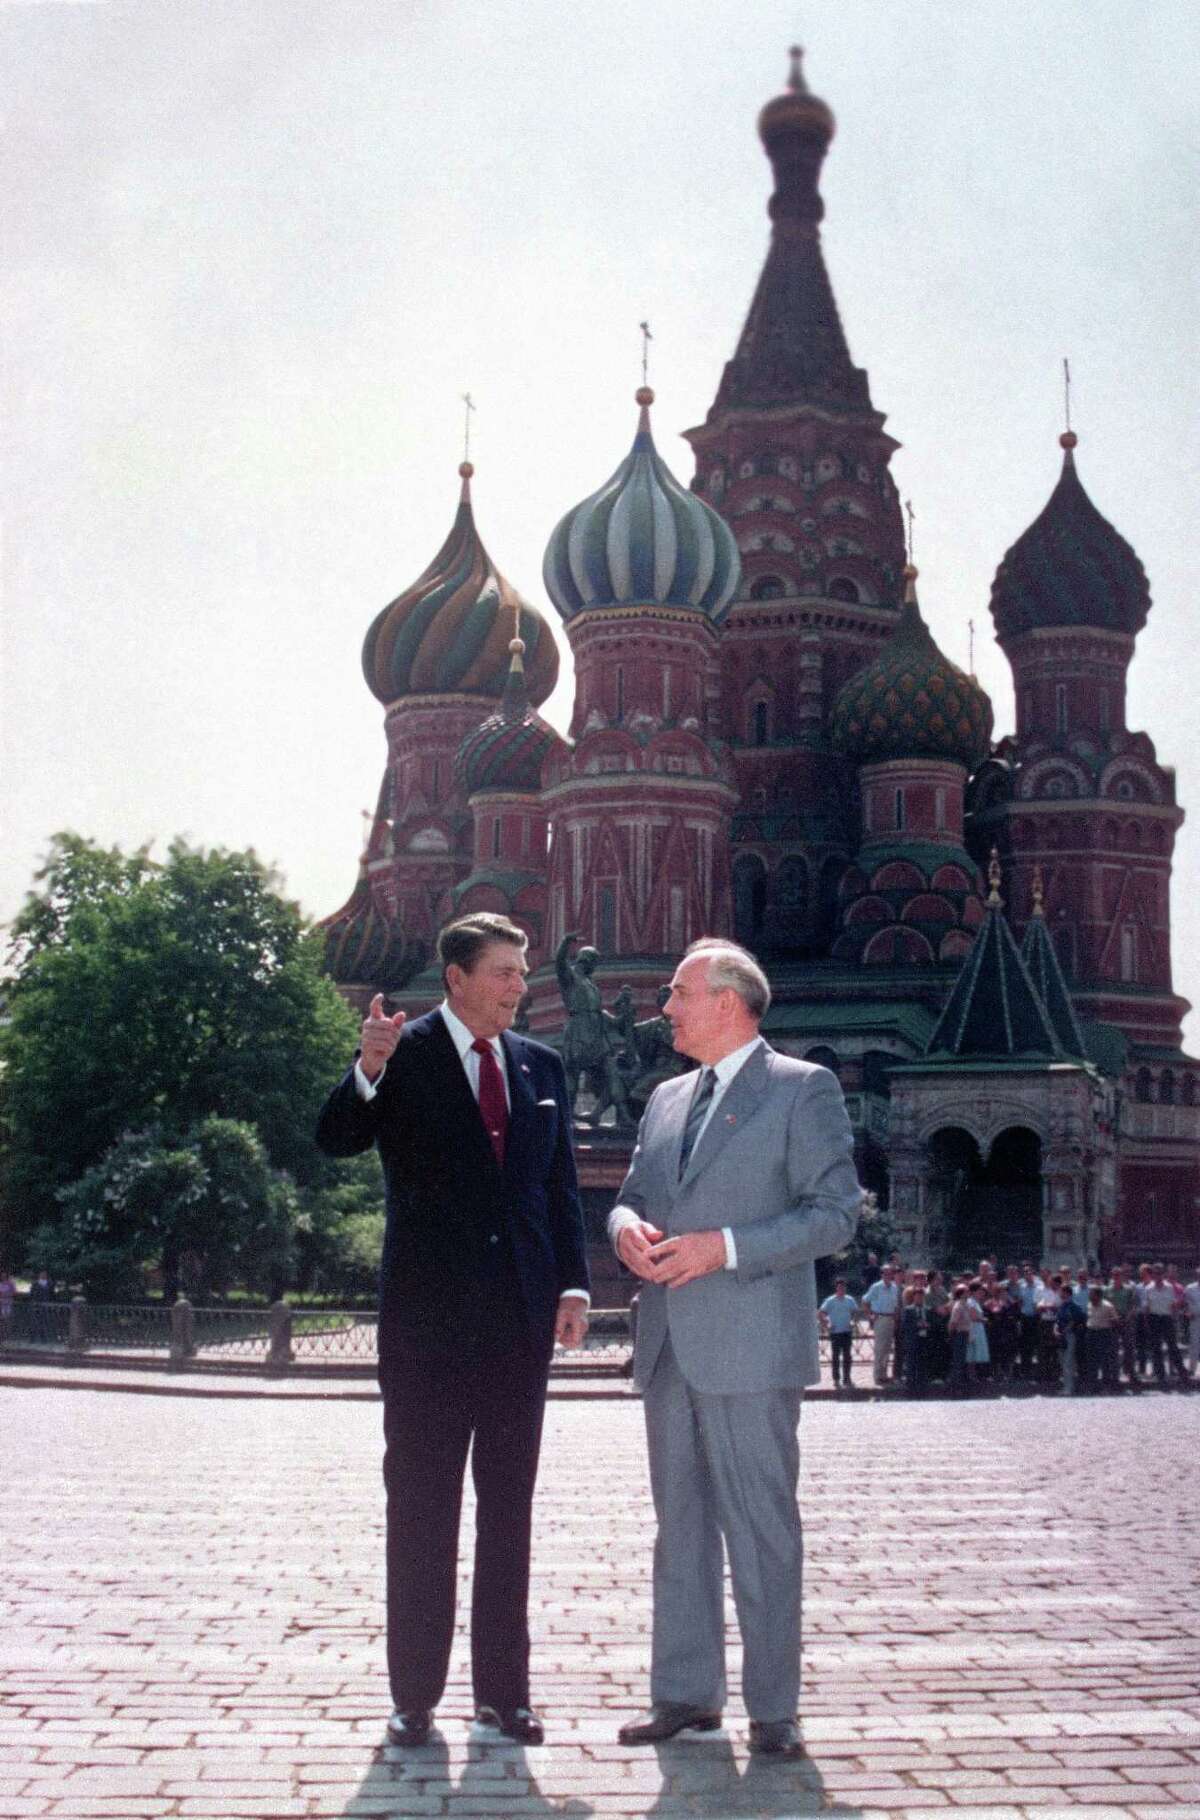 U.S. President Ronald Reagan, left, and Soviet leader Mikhail Gorbachev stand alone during an impromptu walk in Red Square in Moscow on May 31, 1988. In the background is St. Basil's Cathedral.